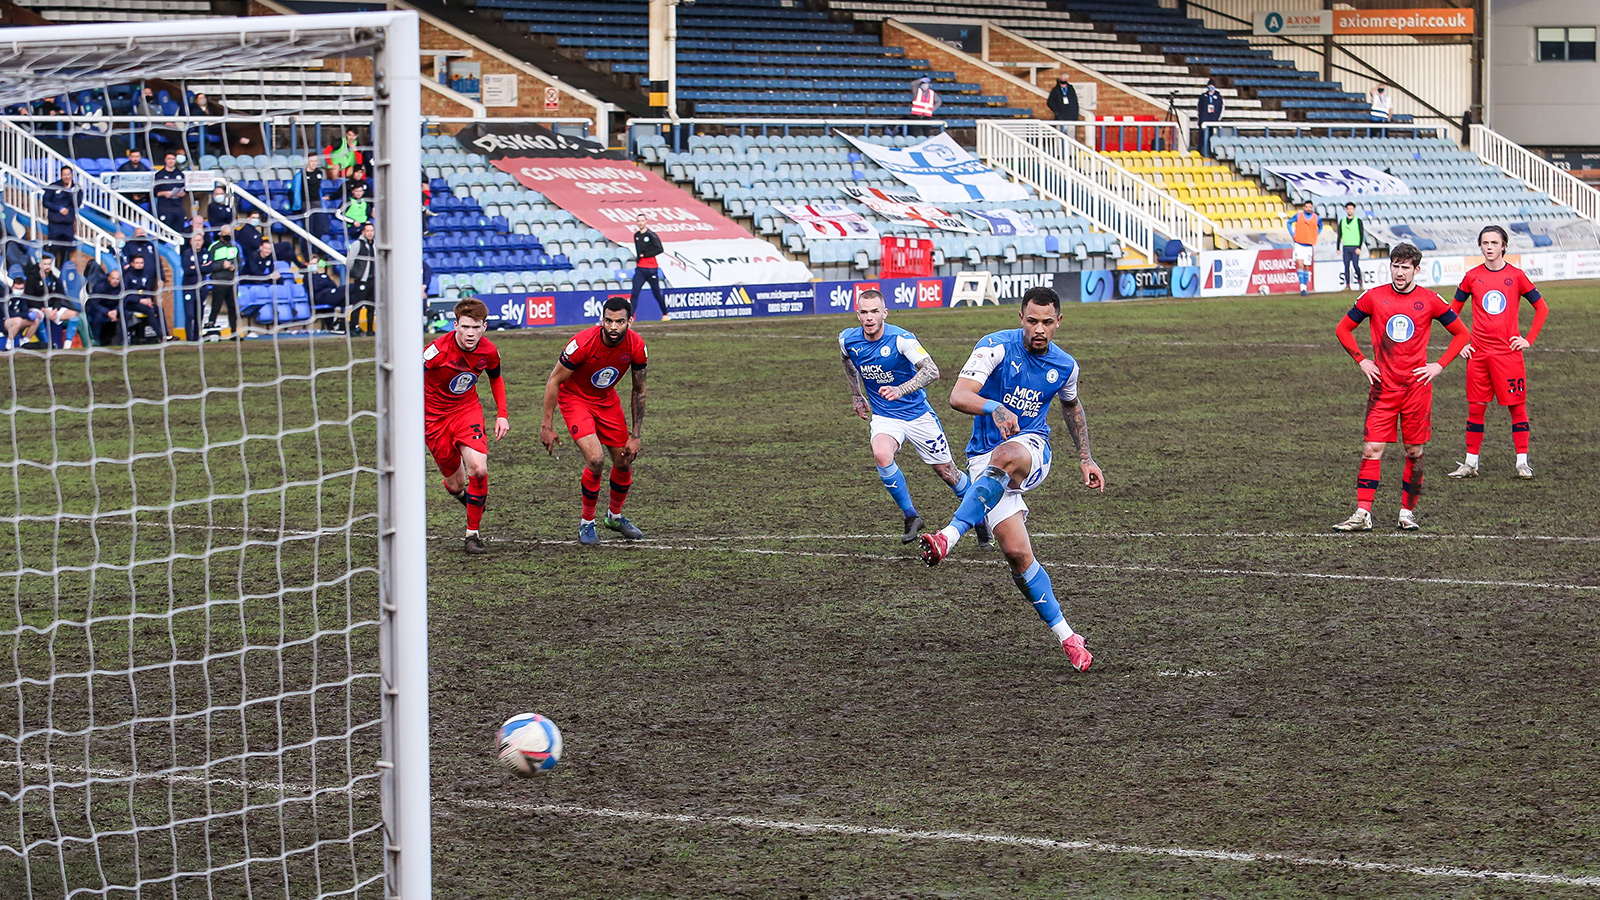 27th February '21 | JCH scores a late penalty to earn Posh an important three points at home to Wigan Athletic